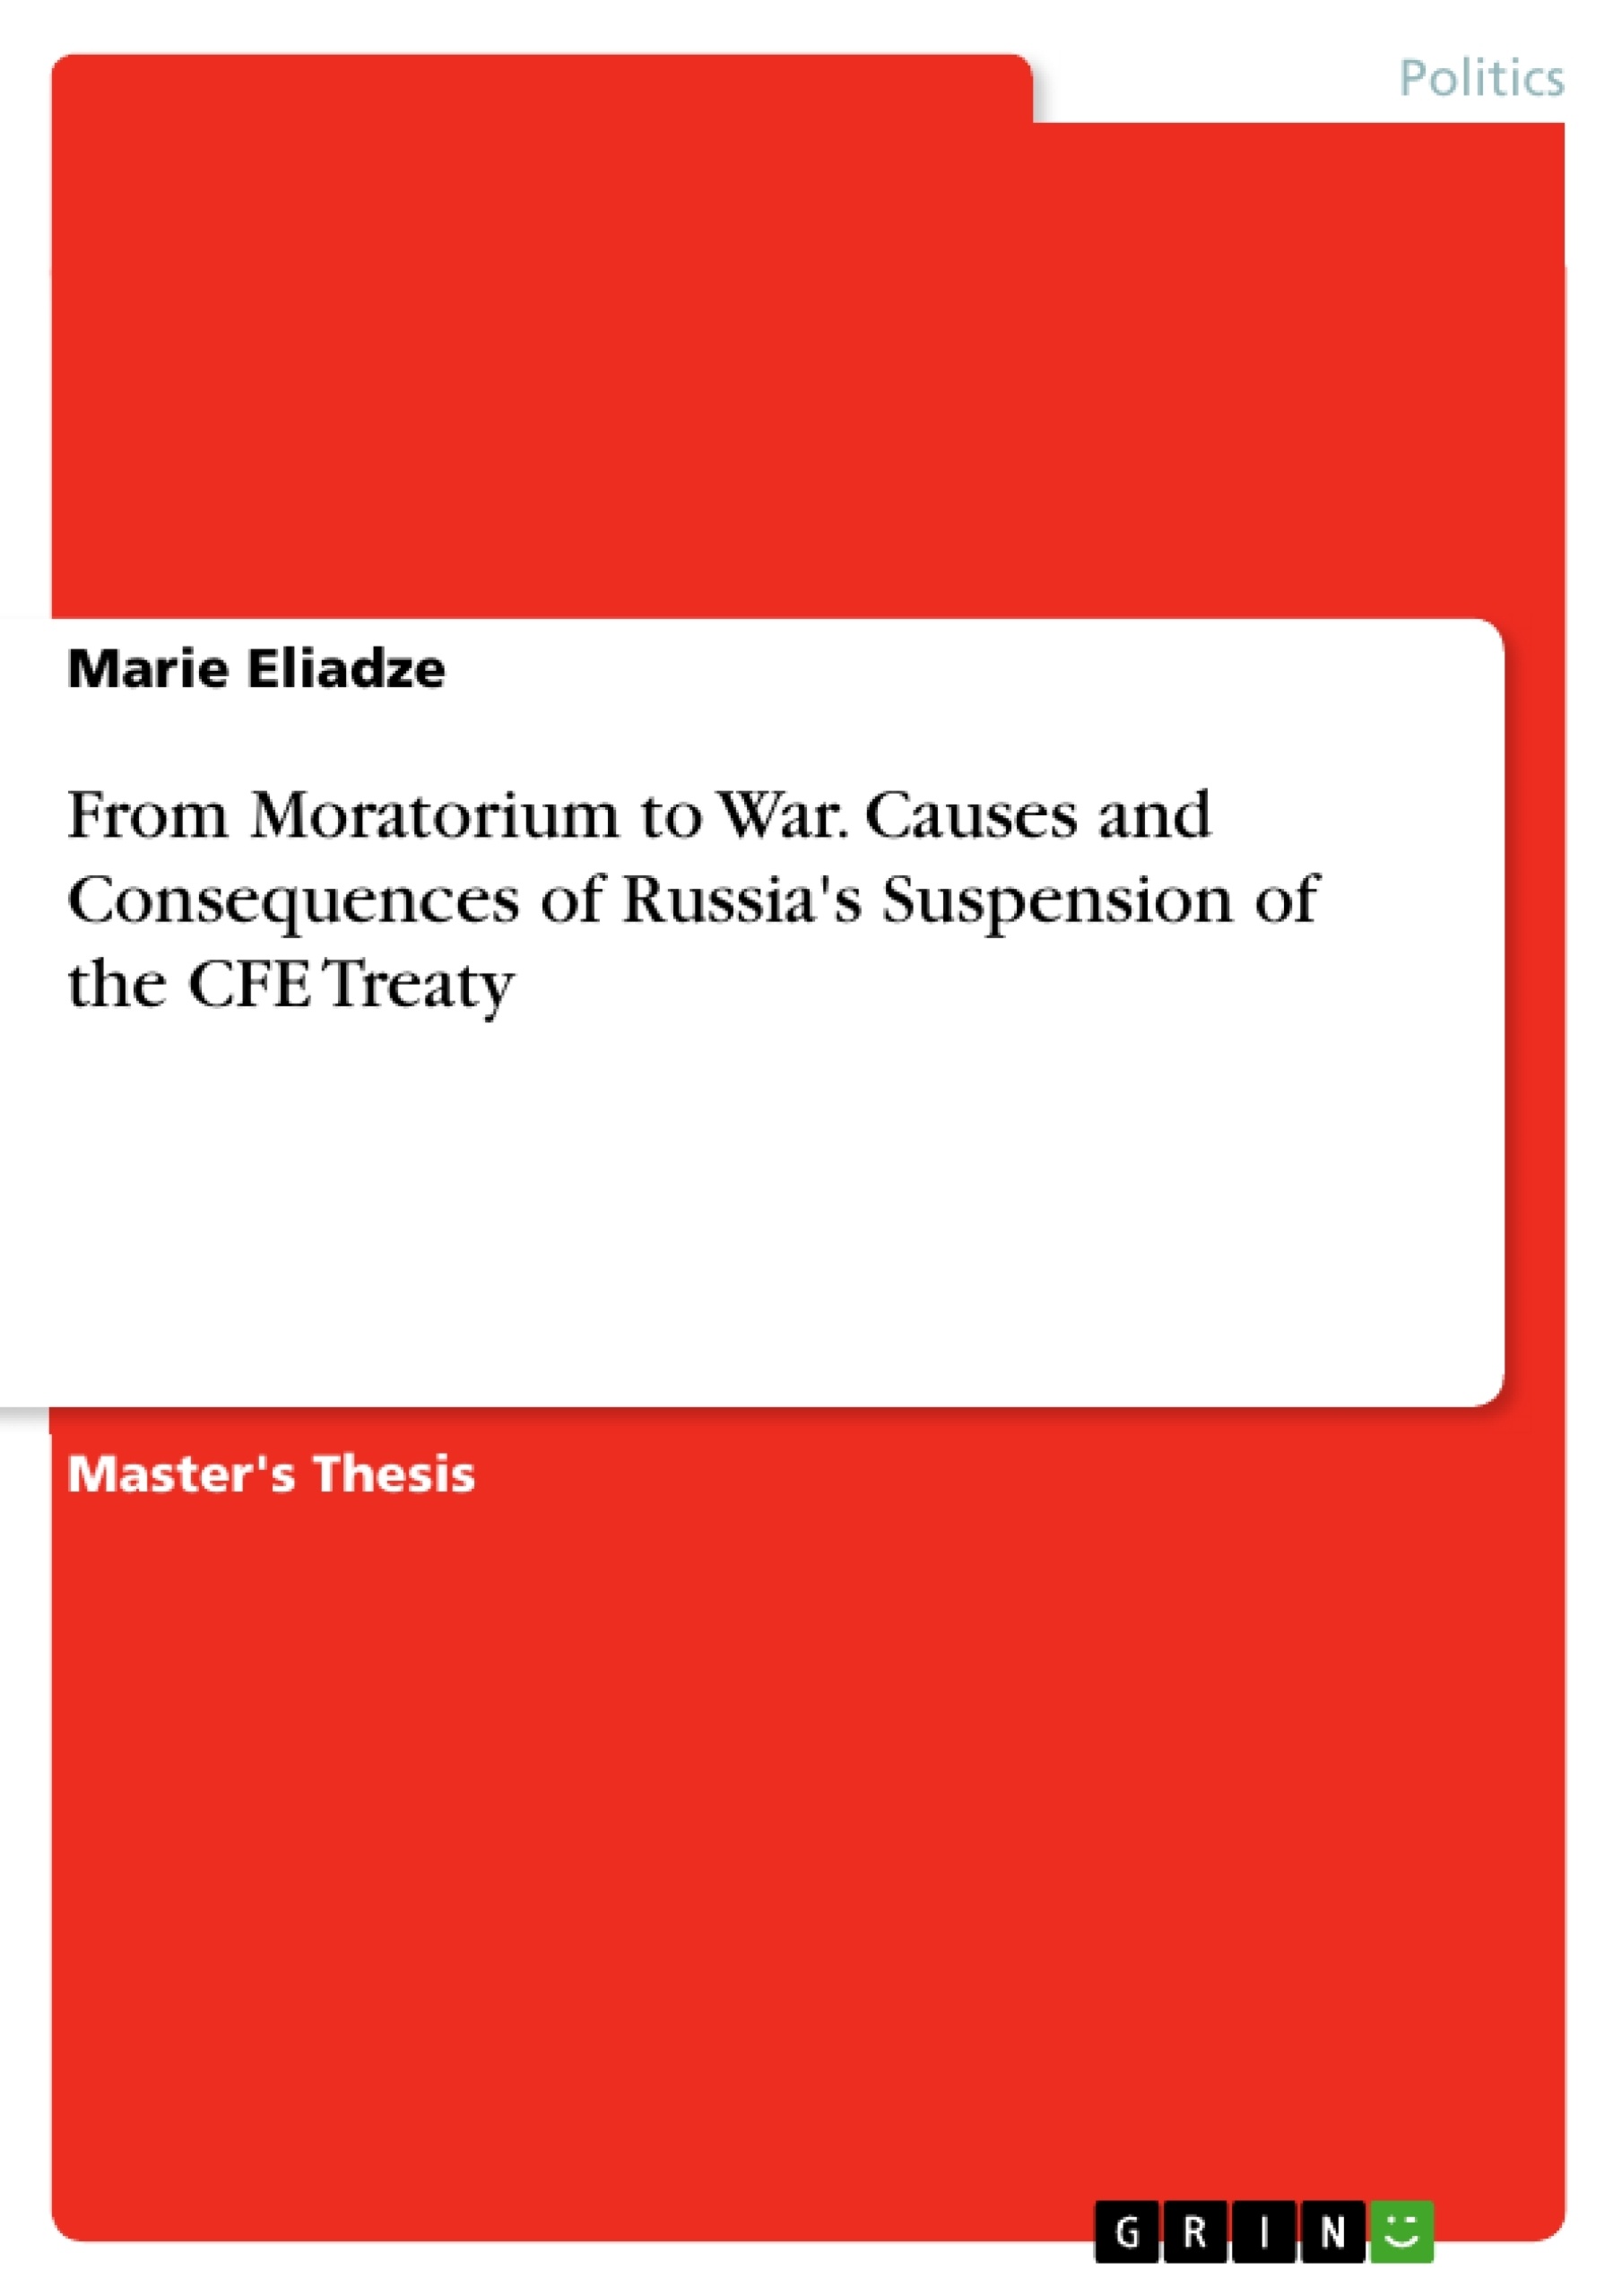 Titre: From Moratorium to War. Causes and Consequences of Russia's Suspension of the  CFE Treaty